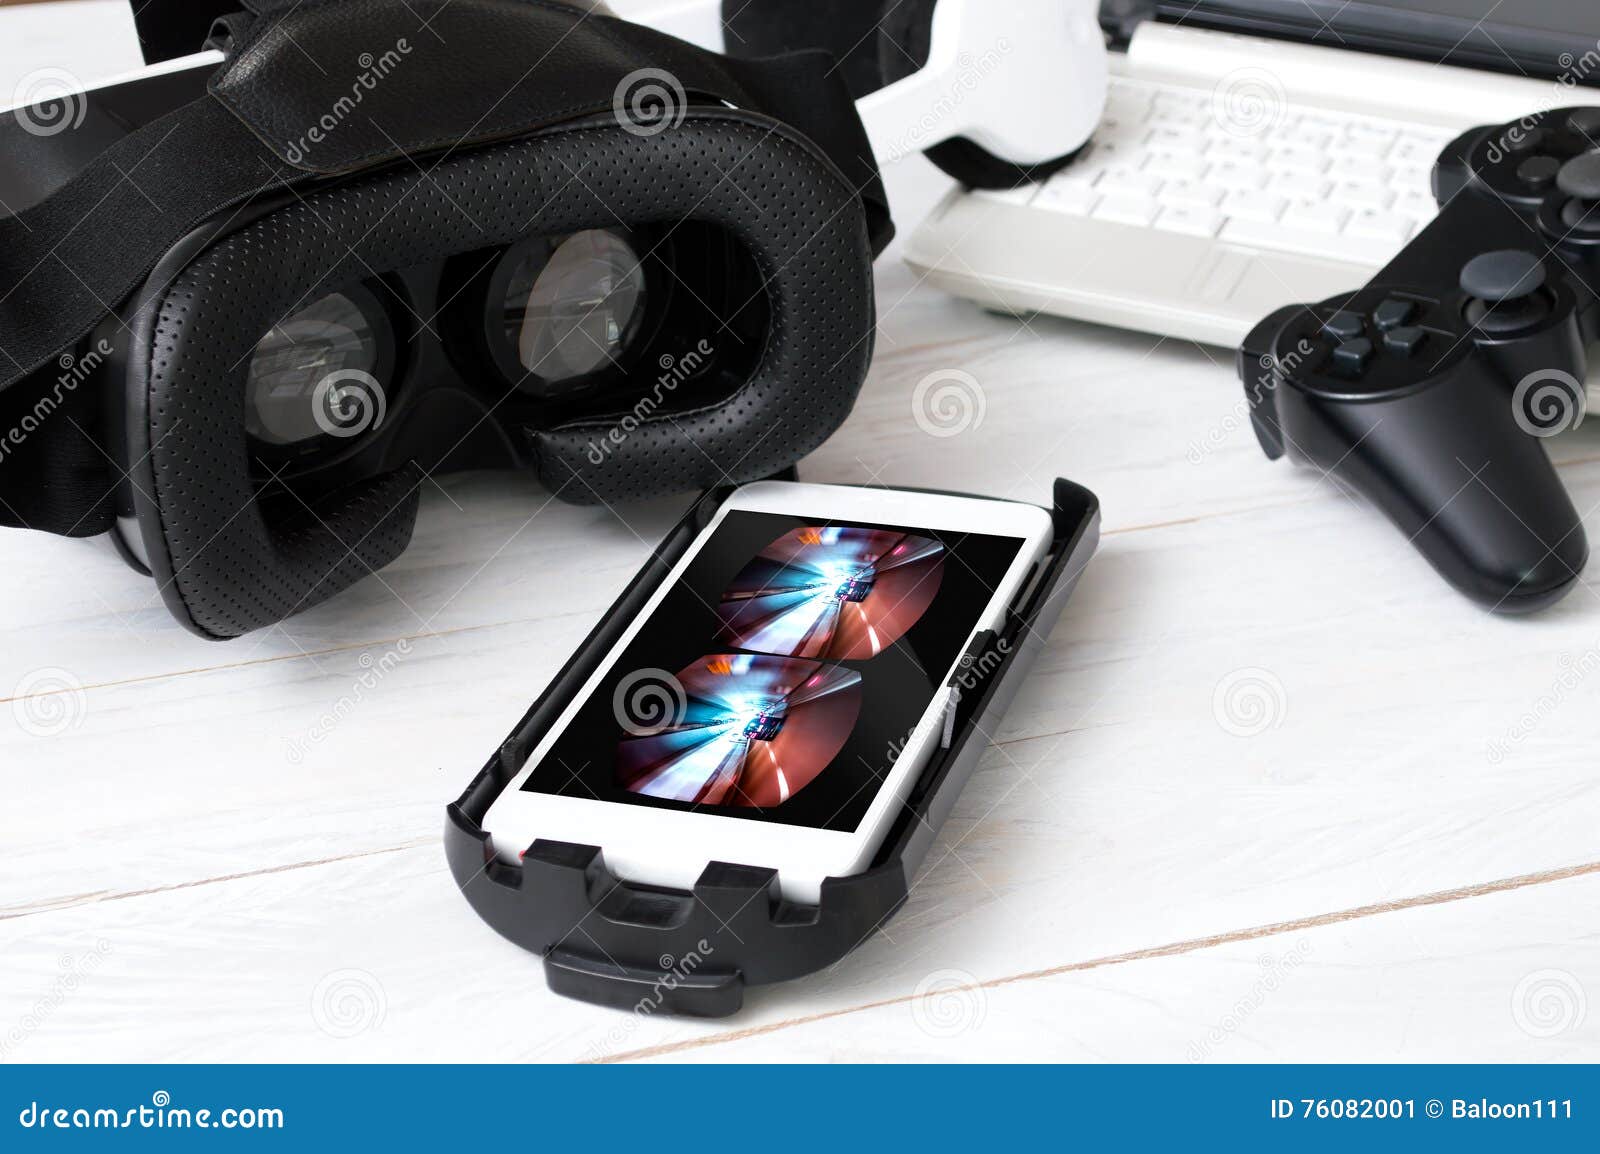 smartphone laying on desk and prepared to play with vr googles.